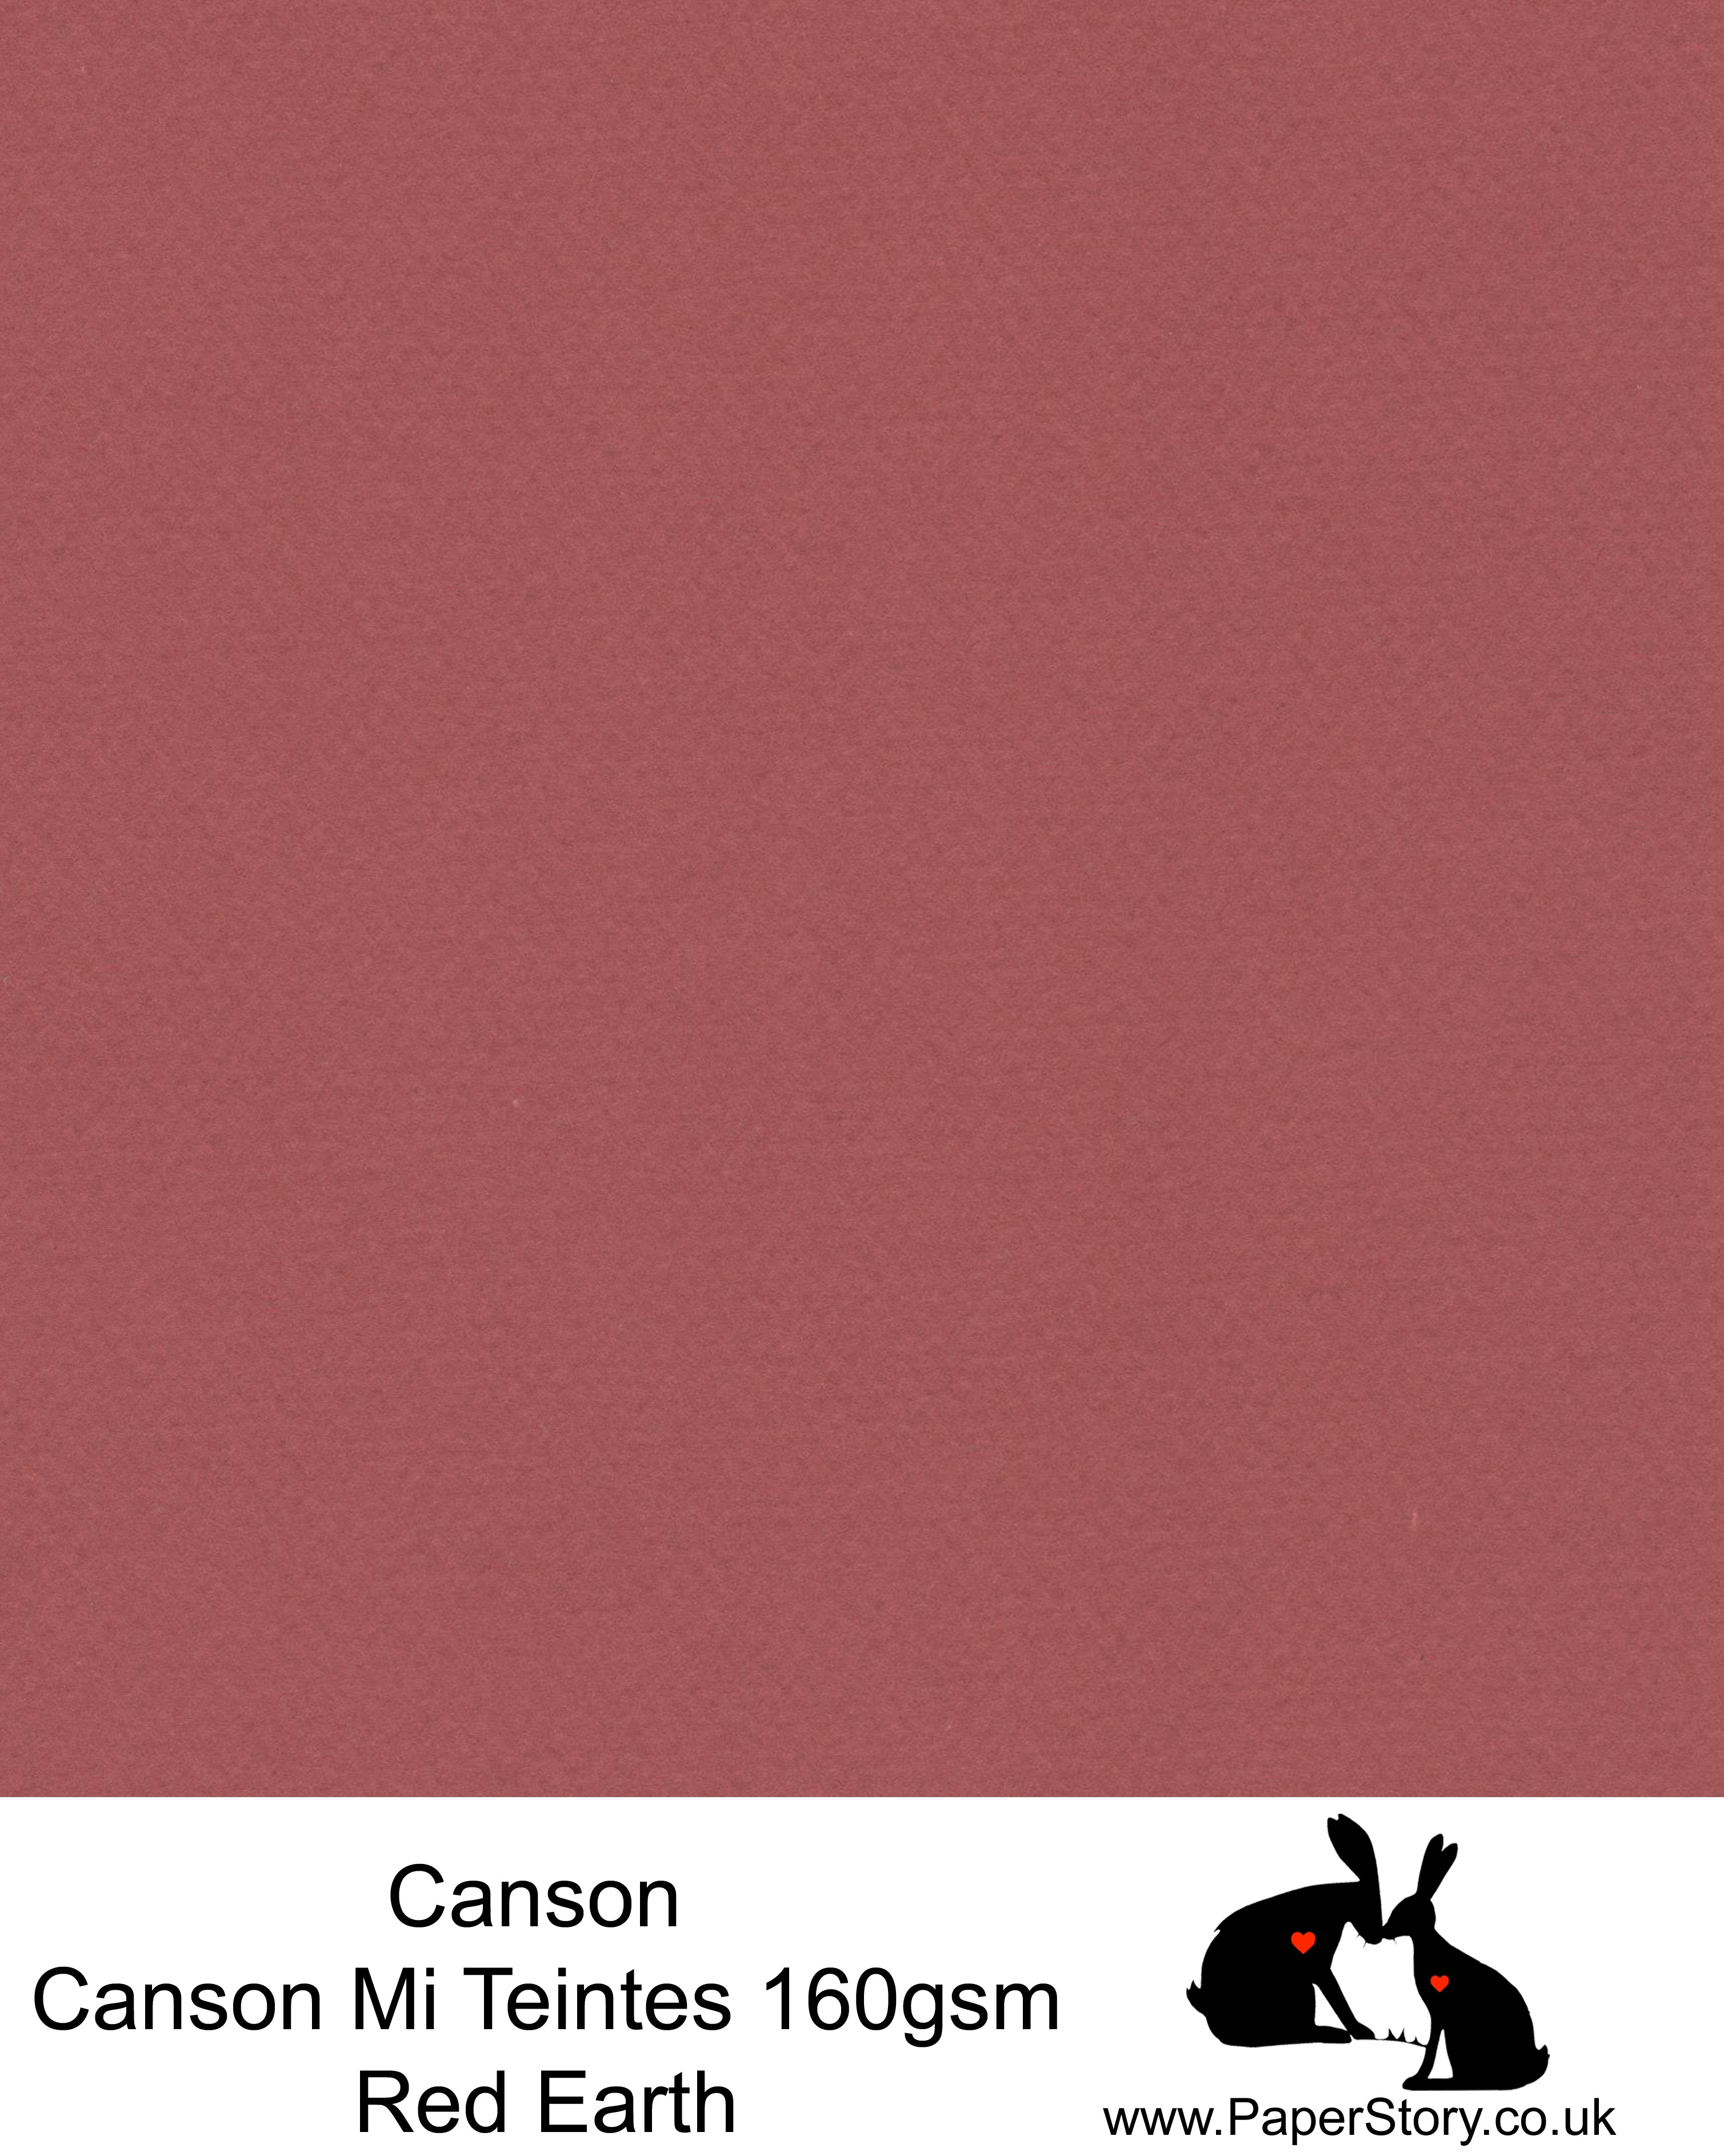 Canson Mi Teintes acid free, Red Earth, hammered texture honeycomb surface paper 160 gsm. This is a popular and classic paper for all artists especially well respected for Pastel  and Papercutting made famous by Paper Panda. This paper has a honeycombed finish one side and fine grain the other. An authentic art paper, acid free with a  very high 50% cotton content. Canson Mi-Teintes complies with the ISO 9706 standard on permanence, a guarantee of excellent conservation  